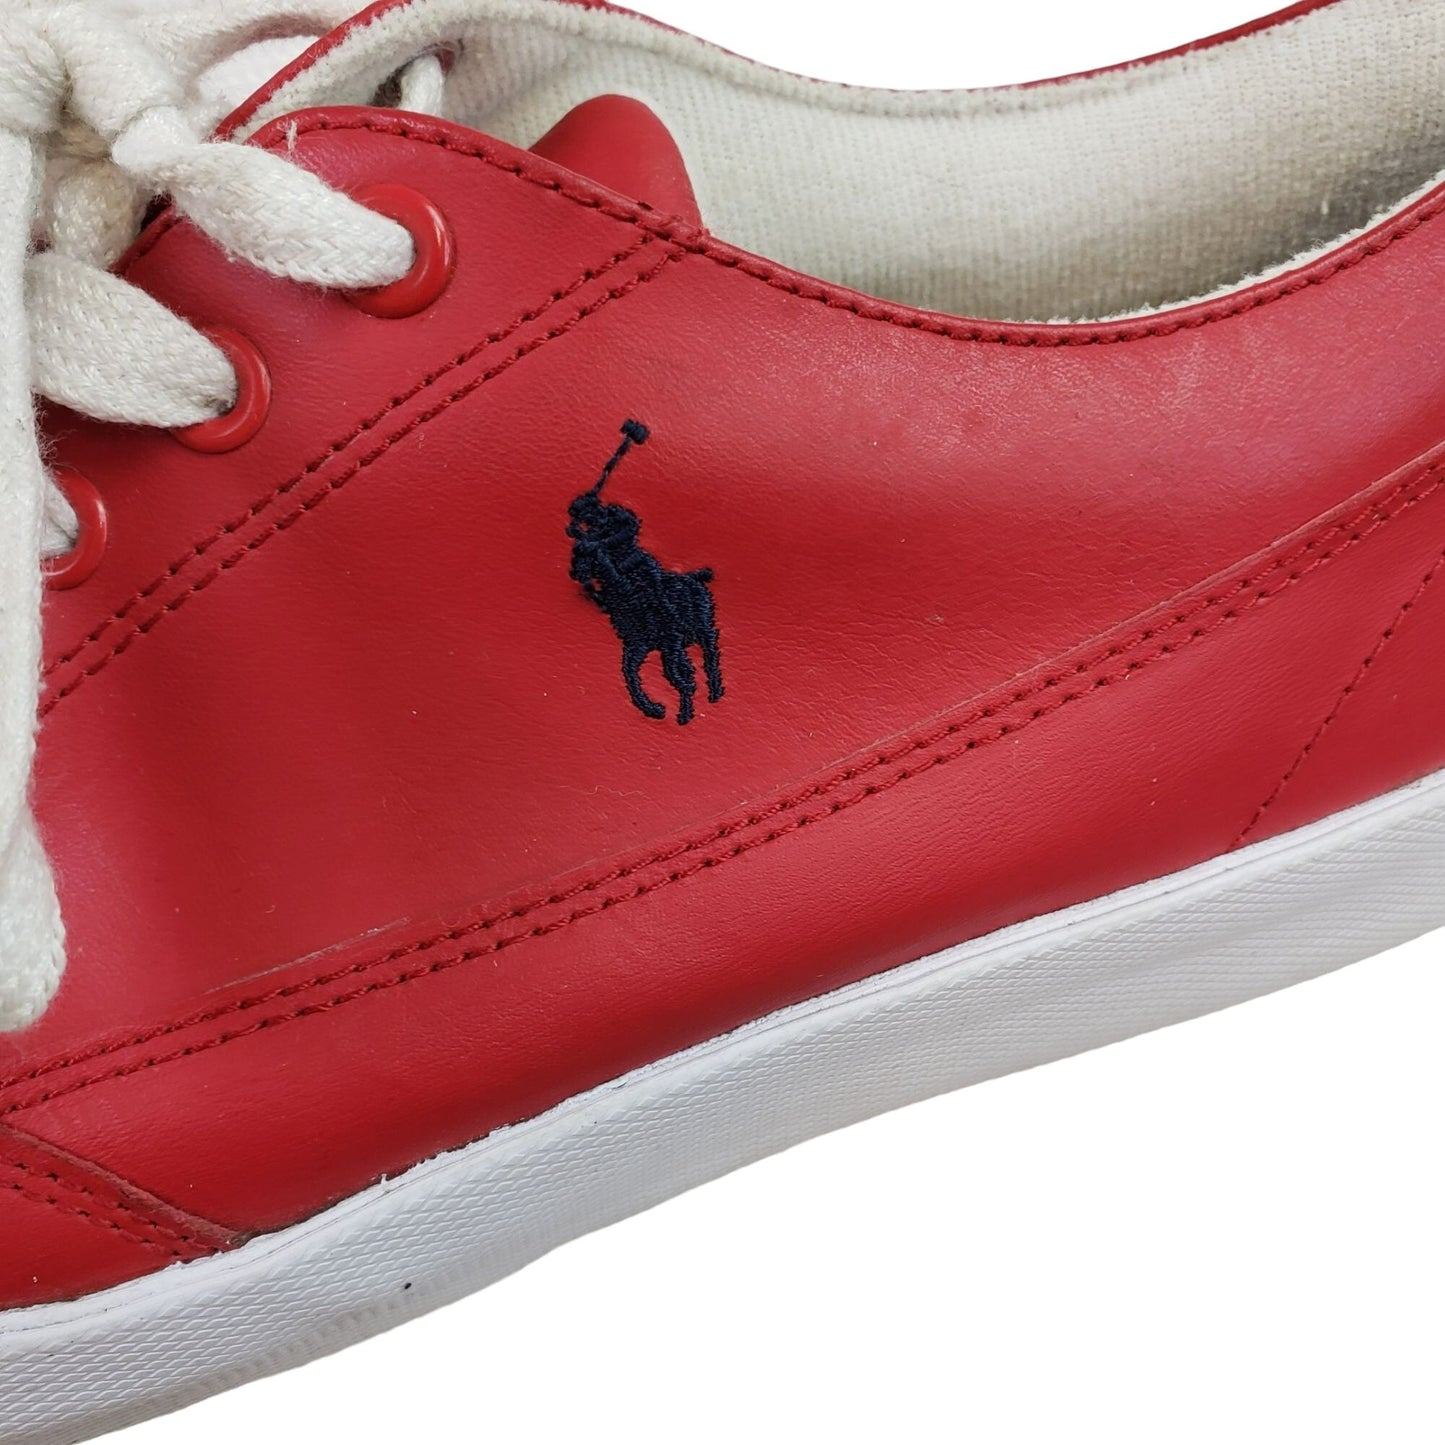 Polo by Ralph Lauren Red Leather Sneakers Size 9.5 D